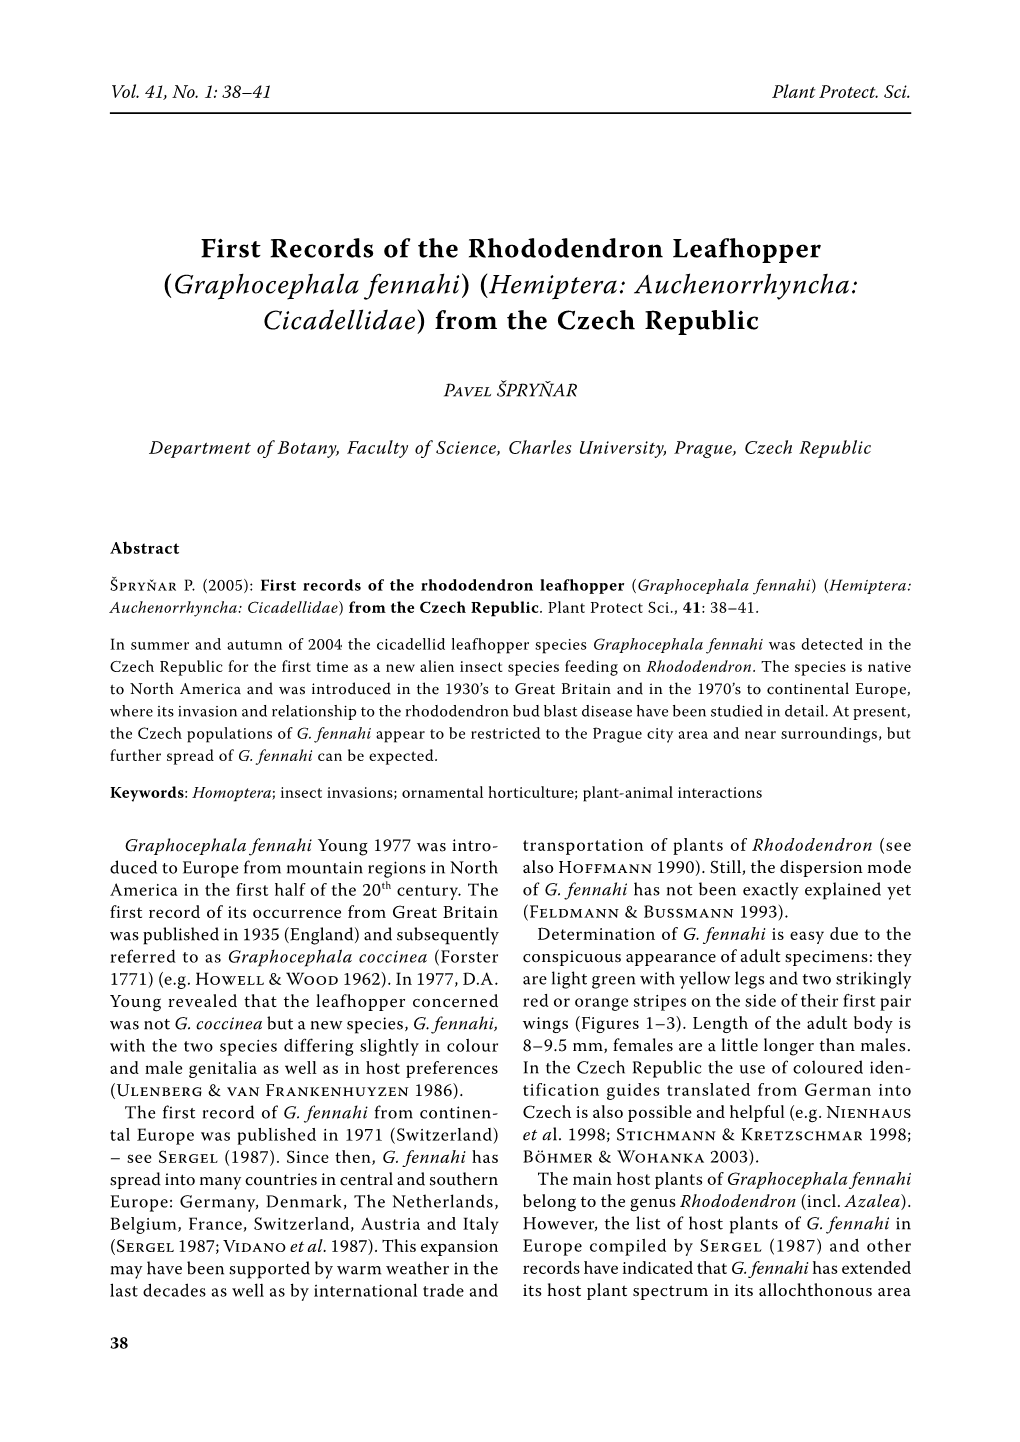 First Records of the Rhododendron Leafhopper (Graphocephala Fennahi) (Hemiptera: Auchenorrhyncha: Cicadellidae) from the Czech Republic